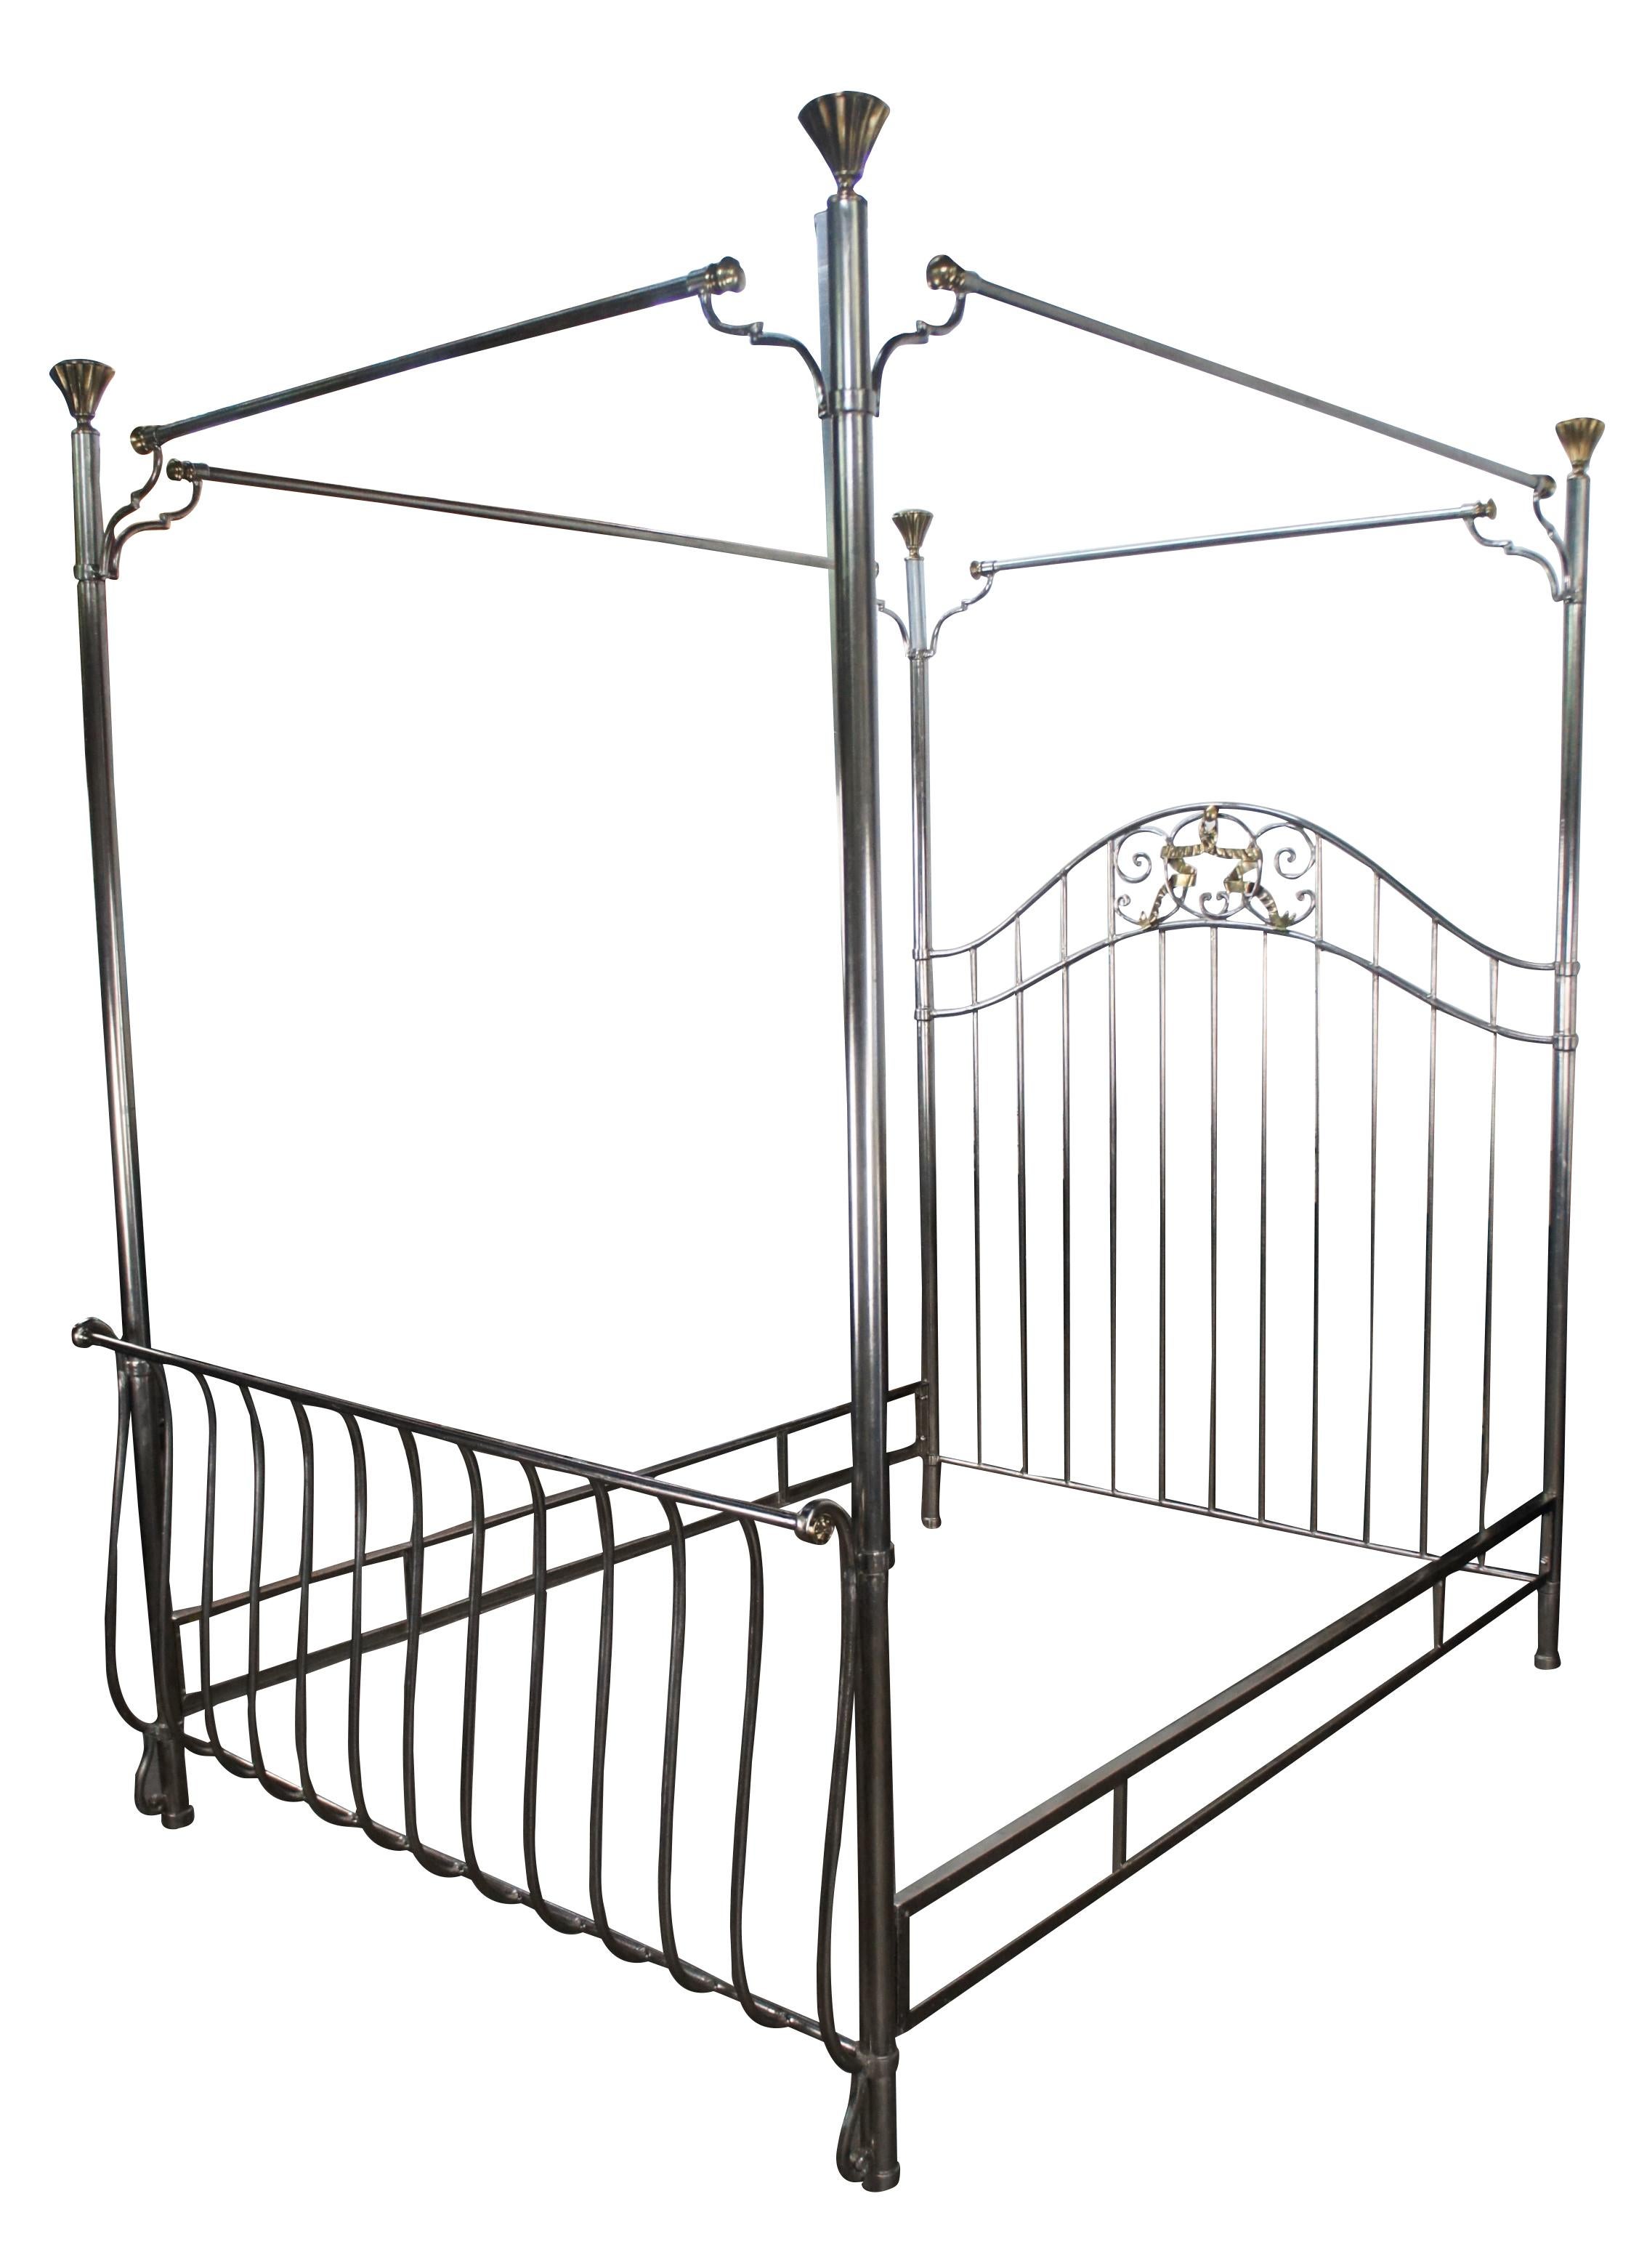 Maitland Smith Neoclassical style four poster Queen size canopy bed, circa 1990s.  Made from metal with a silver and gold finish.  Features a sleigh form along the front and camelback headboard with ornate scrolling and laurel wreath at the center. 